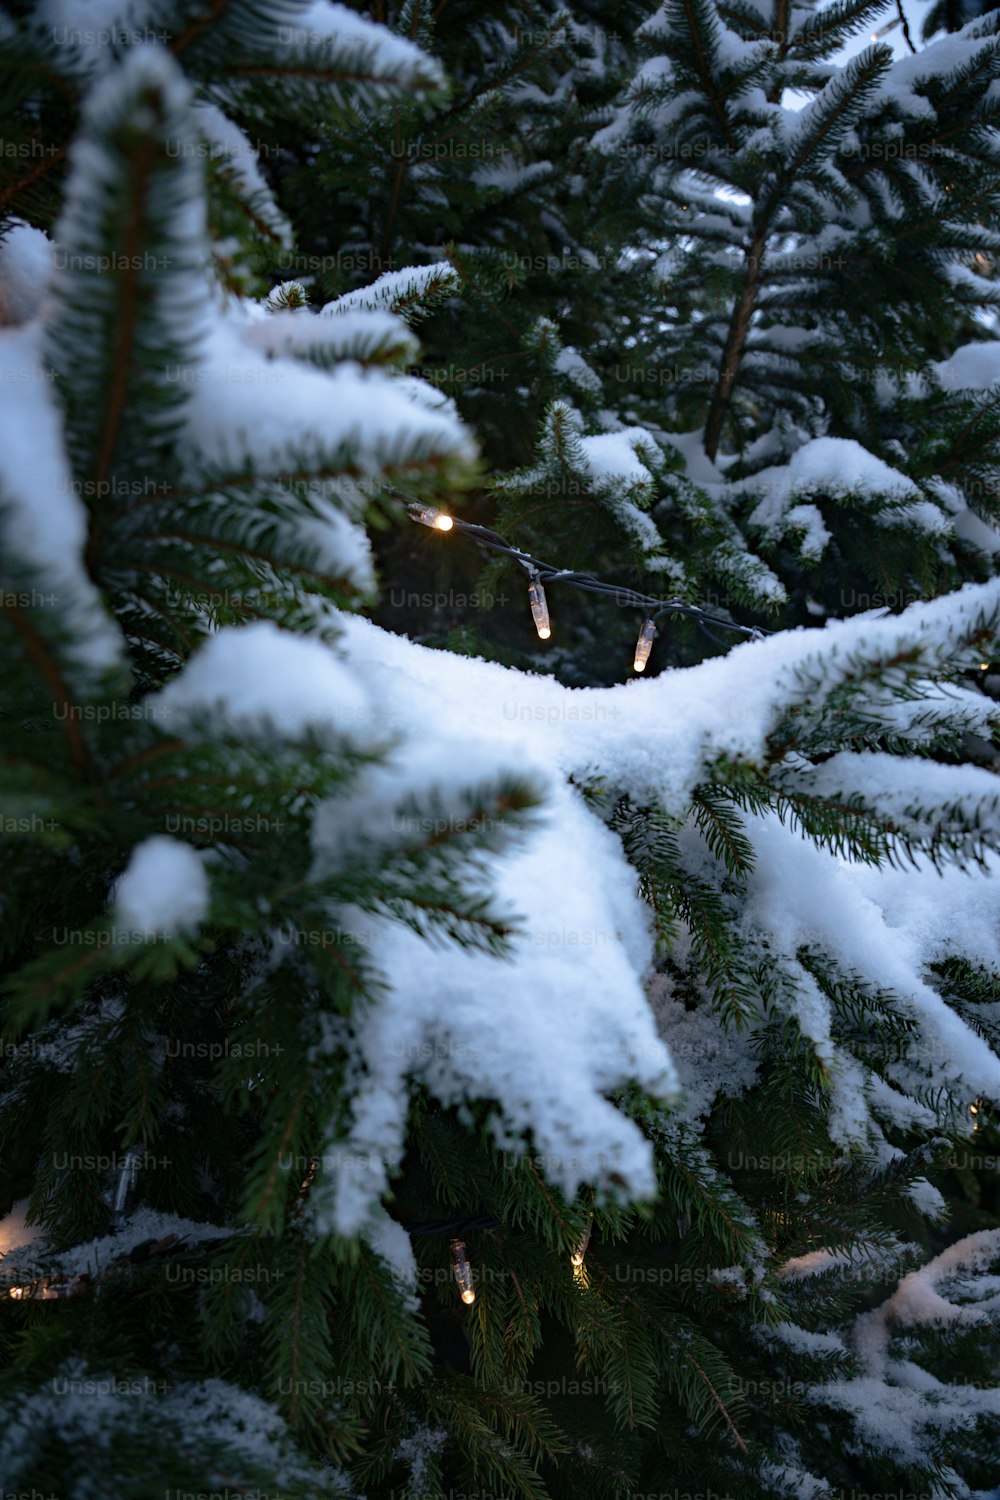 a close up of a snow covered pine tree